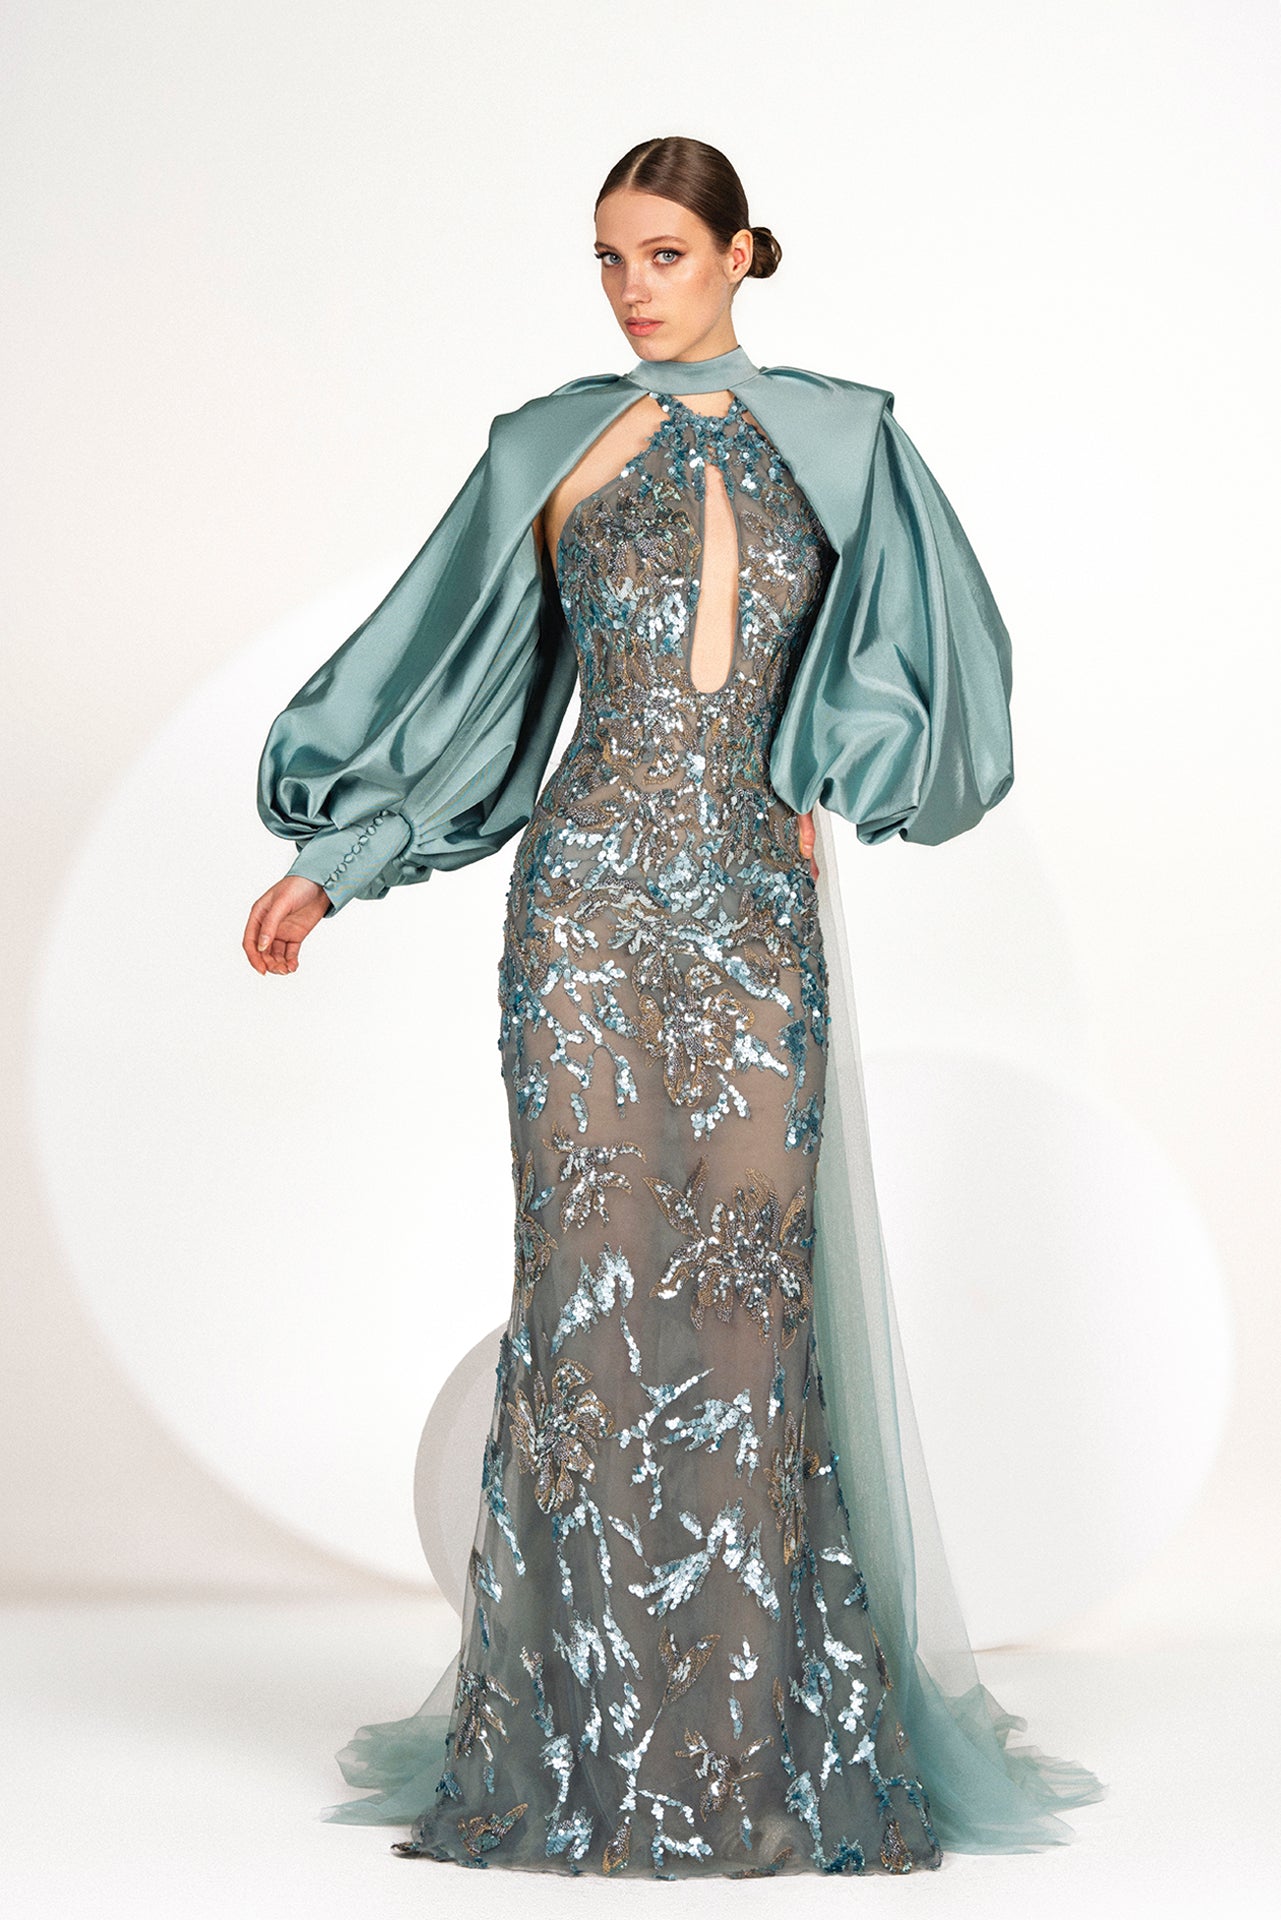 Dusty Blue Tulle Embroidered Evening Dress with Keyhole Neckline and  Taffetas Bolero with Puffy Sleeves & Cuffs, and Watteau Tulle Sweep Length